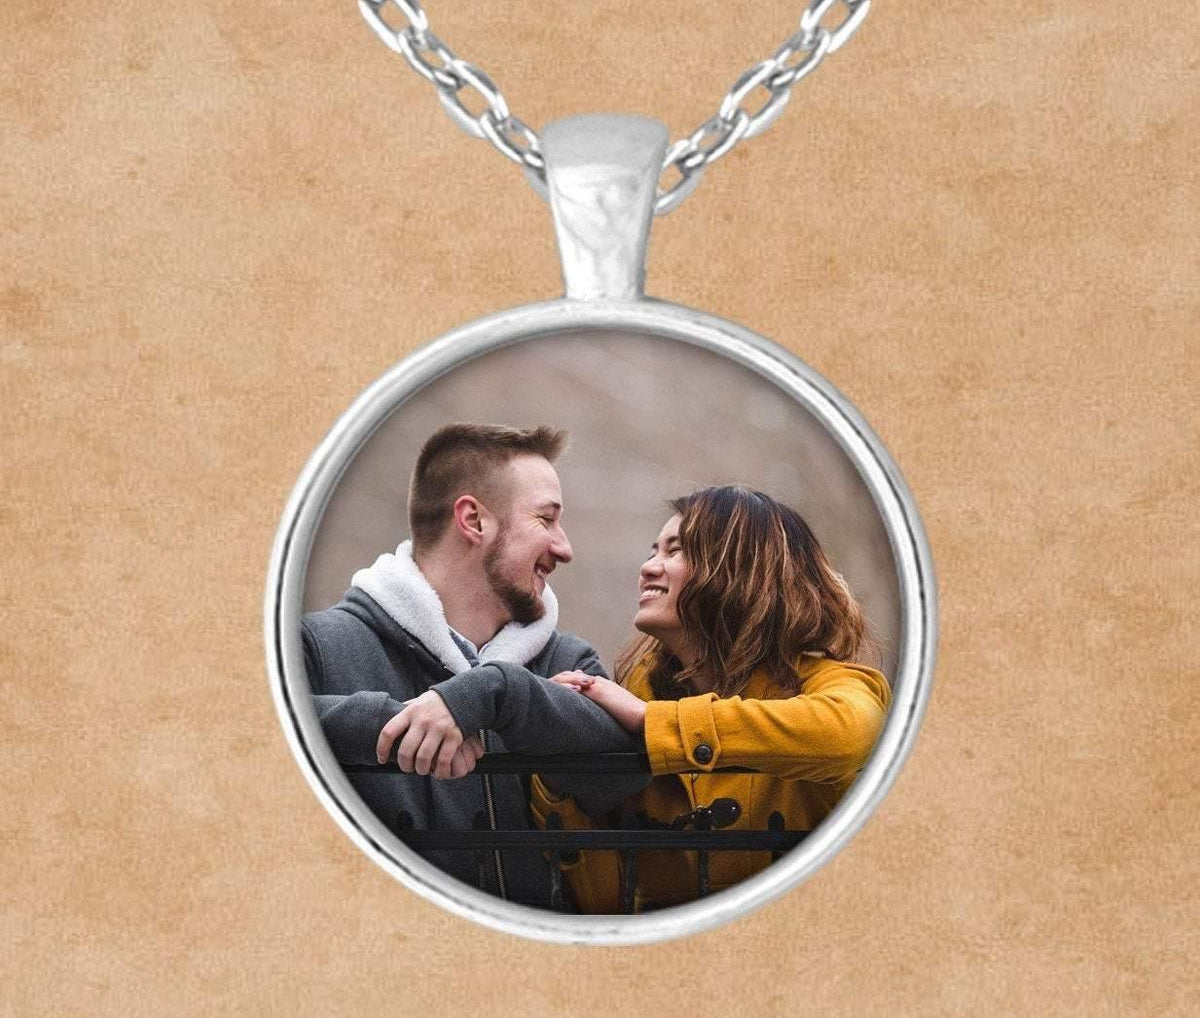 Custom Jewelry | Personalized Jewelry | Pendant Necklace | Custom Photo - This &amp; That Solutions - Custom Jewelry | Personalized Jewelry | Pendant Necklace | Custom Photo - Personalized Gifts &amp; Custom Home Decor